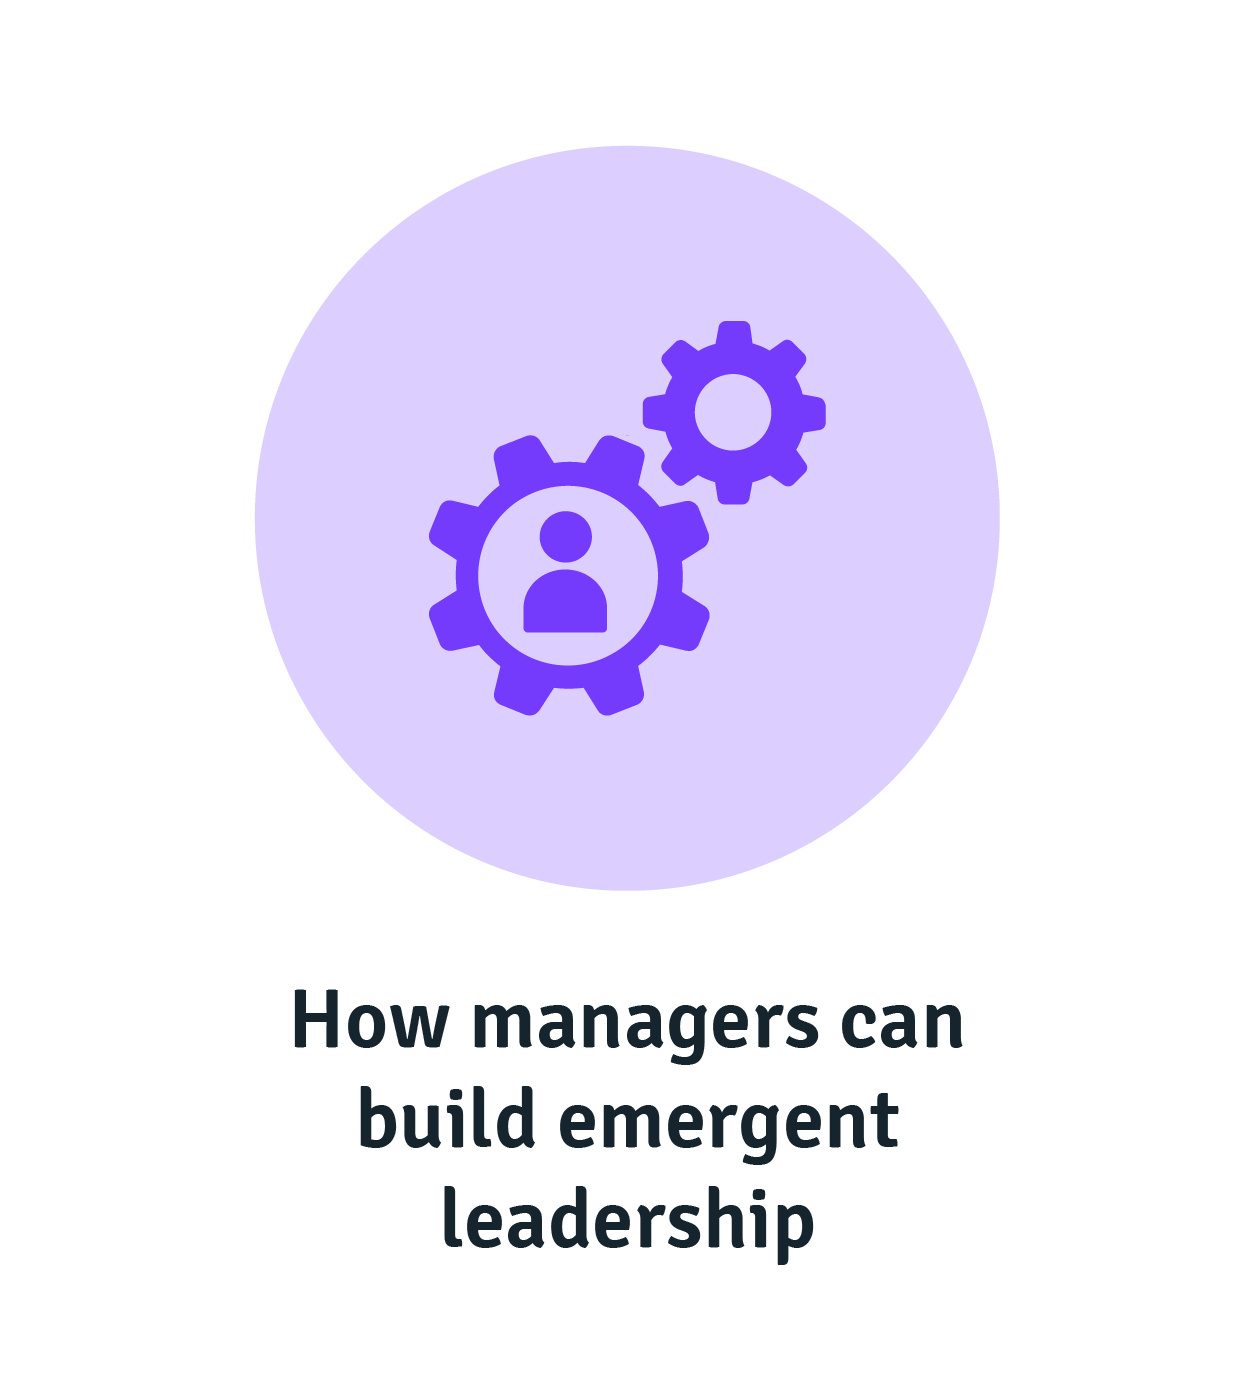 How managers can build emergent leadership